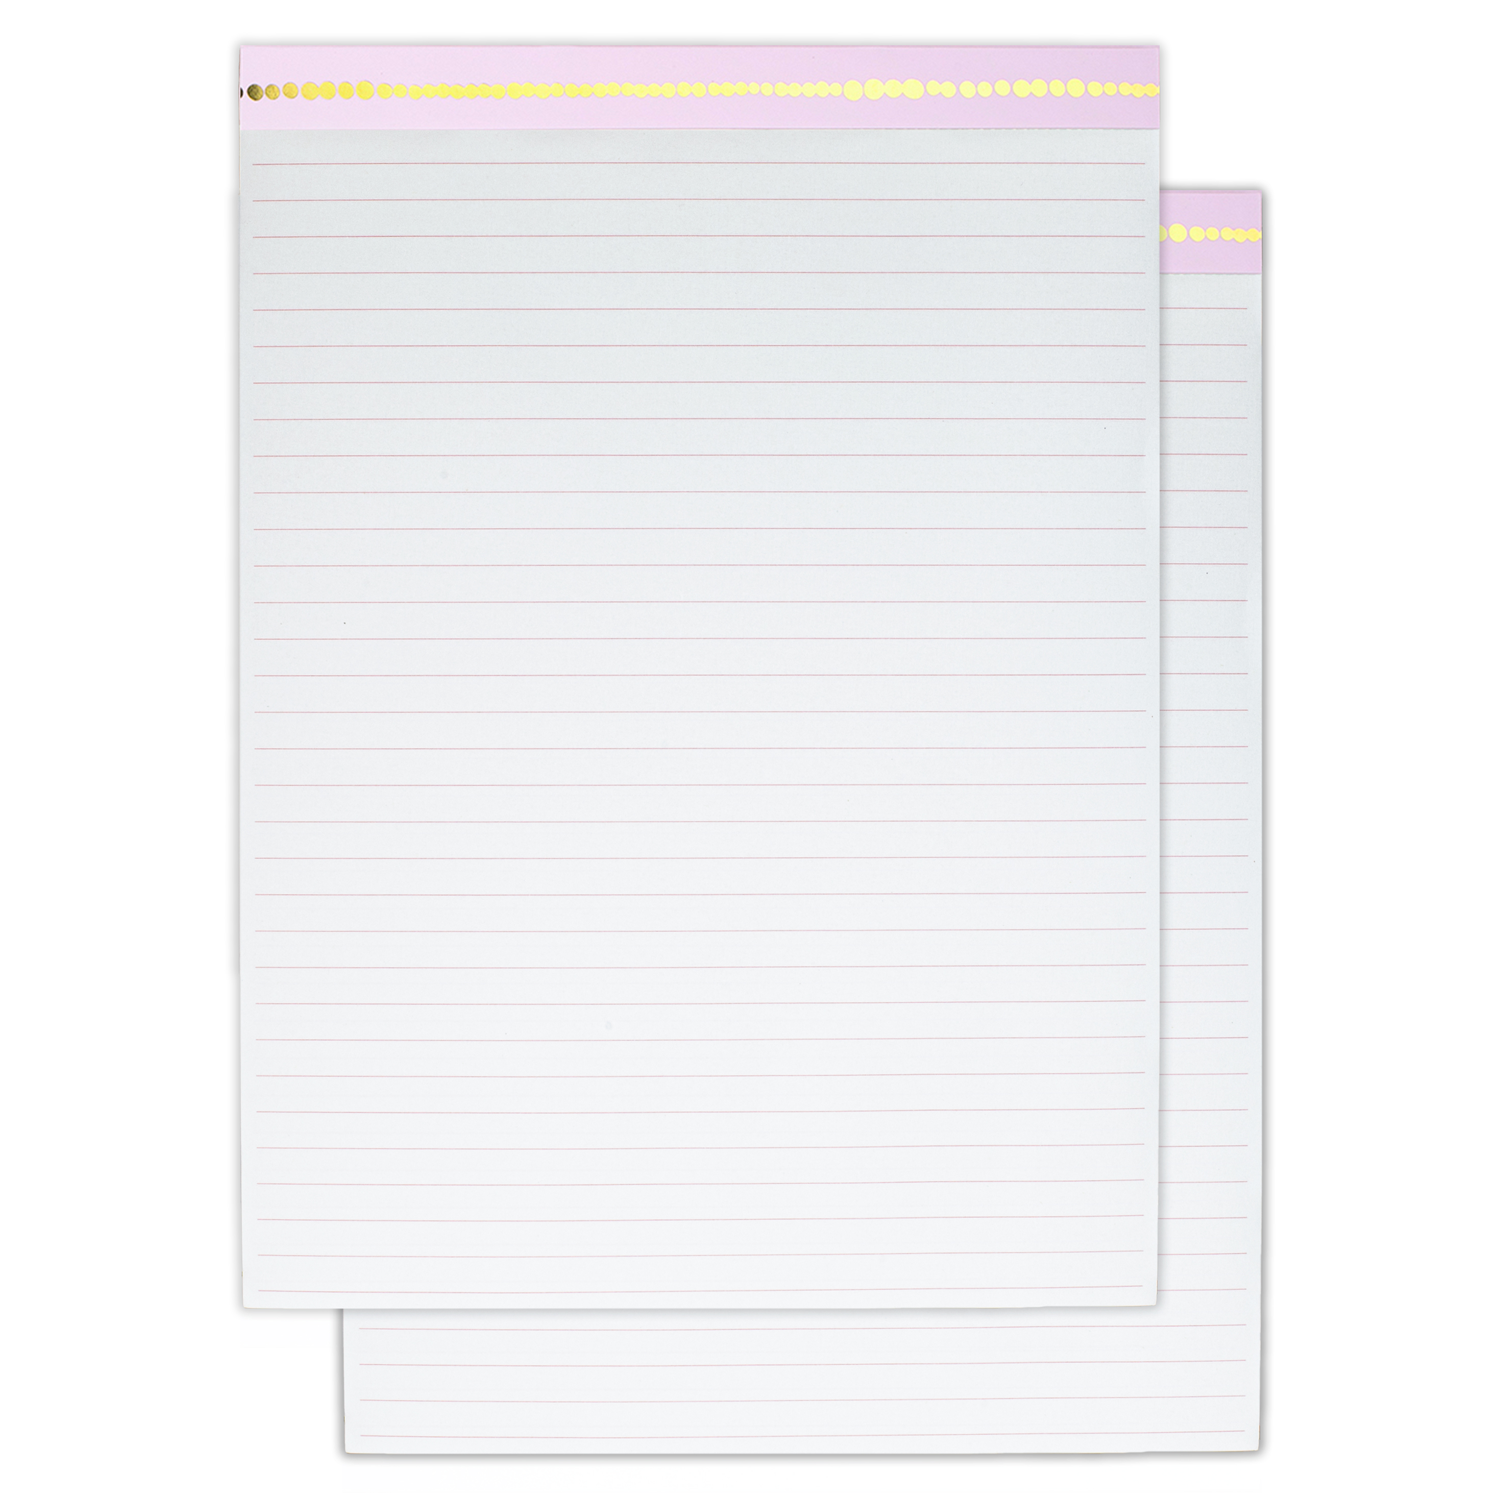 2-pack of lined writing pads with 40 pages each to refill clipboard folios